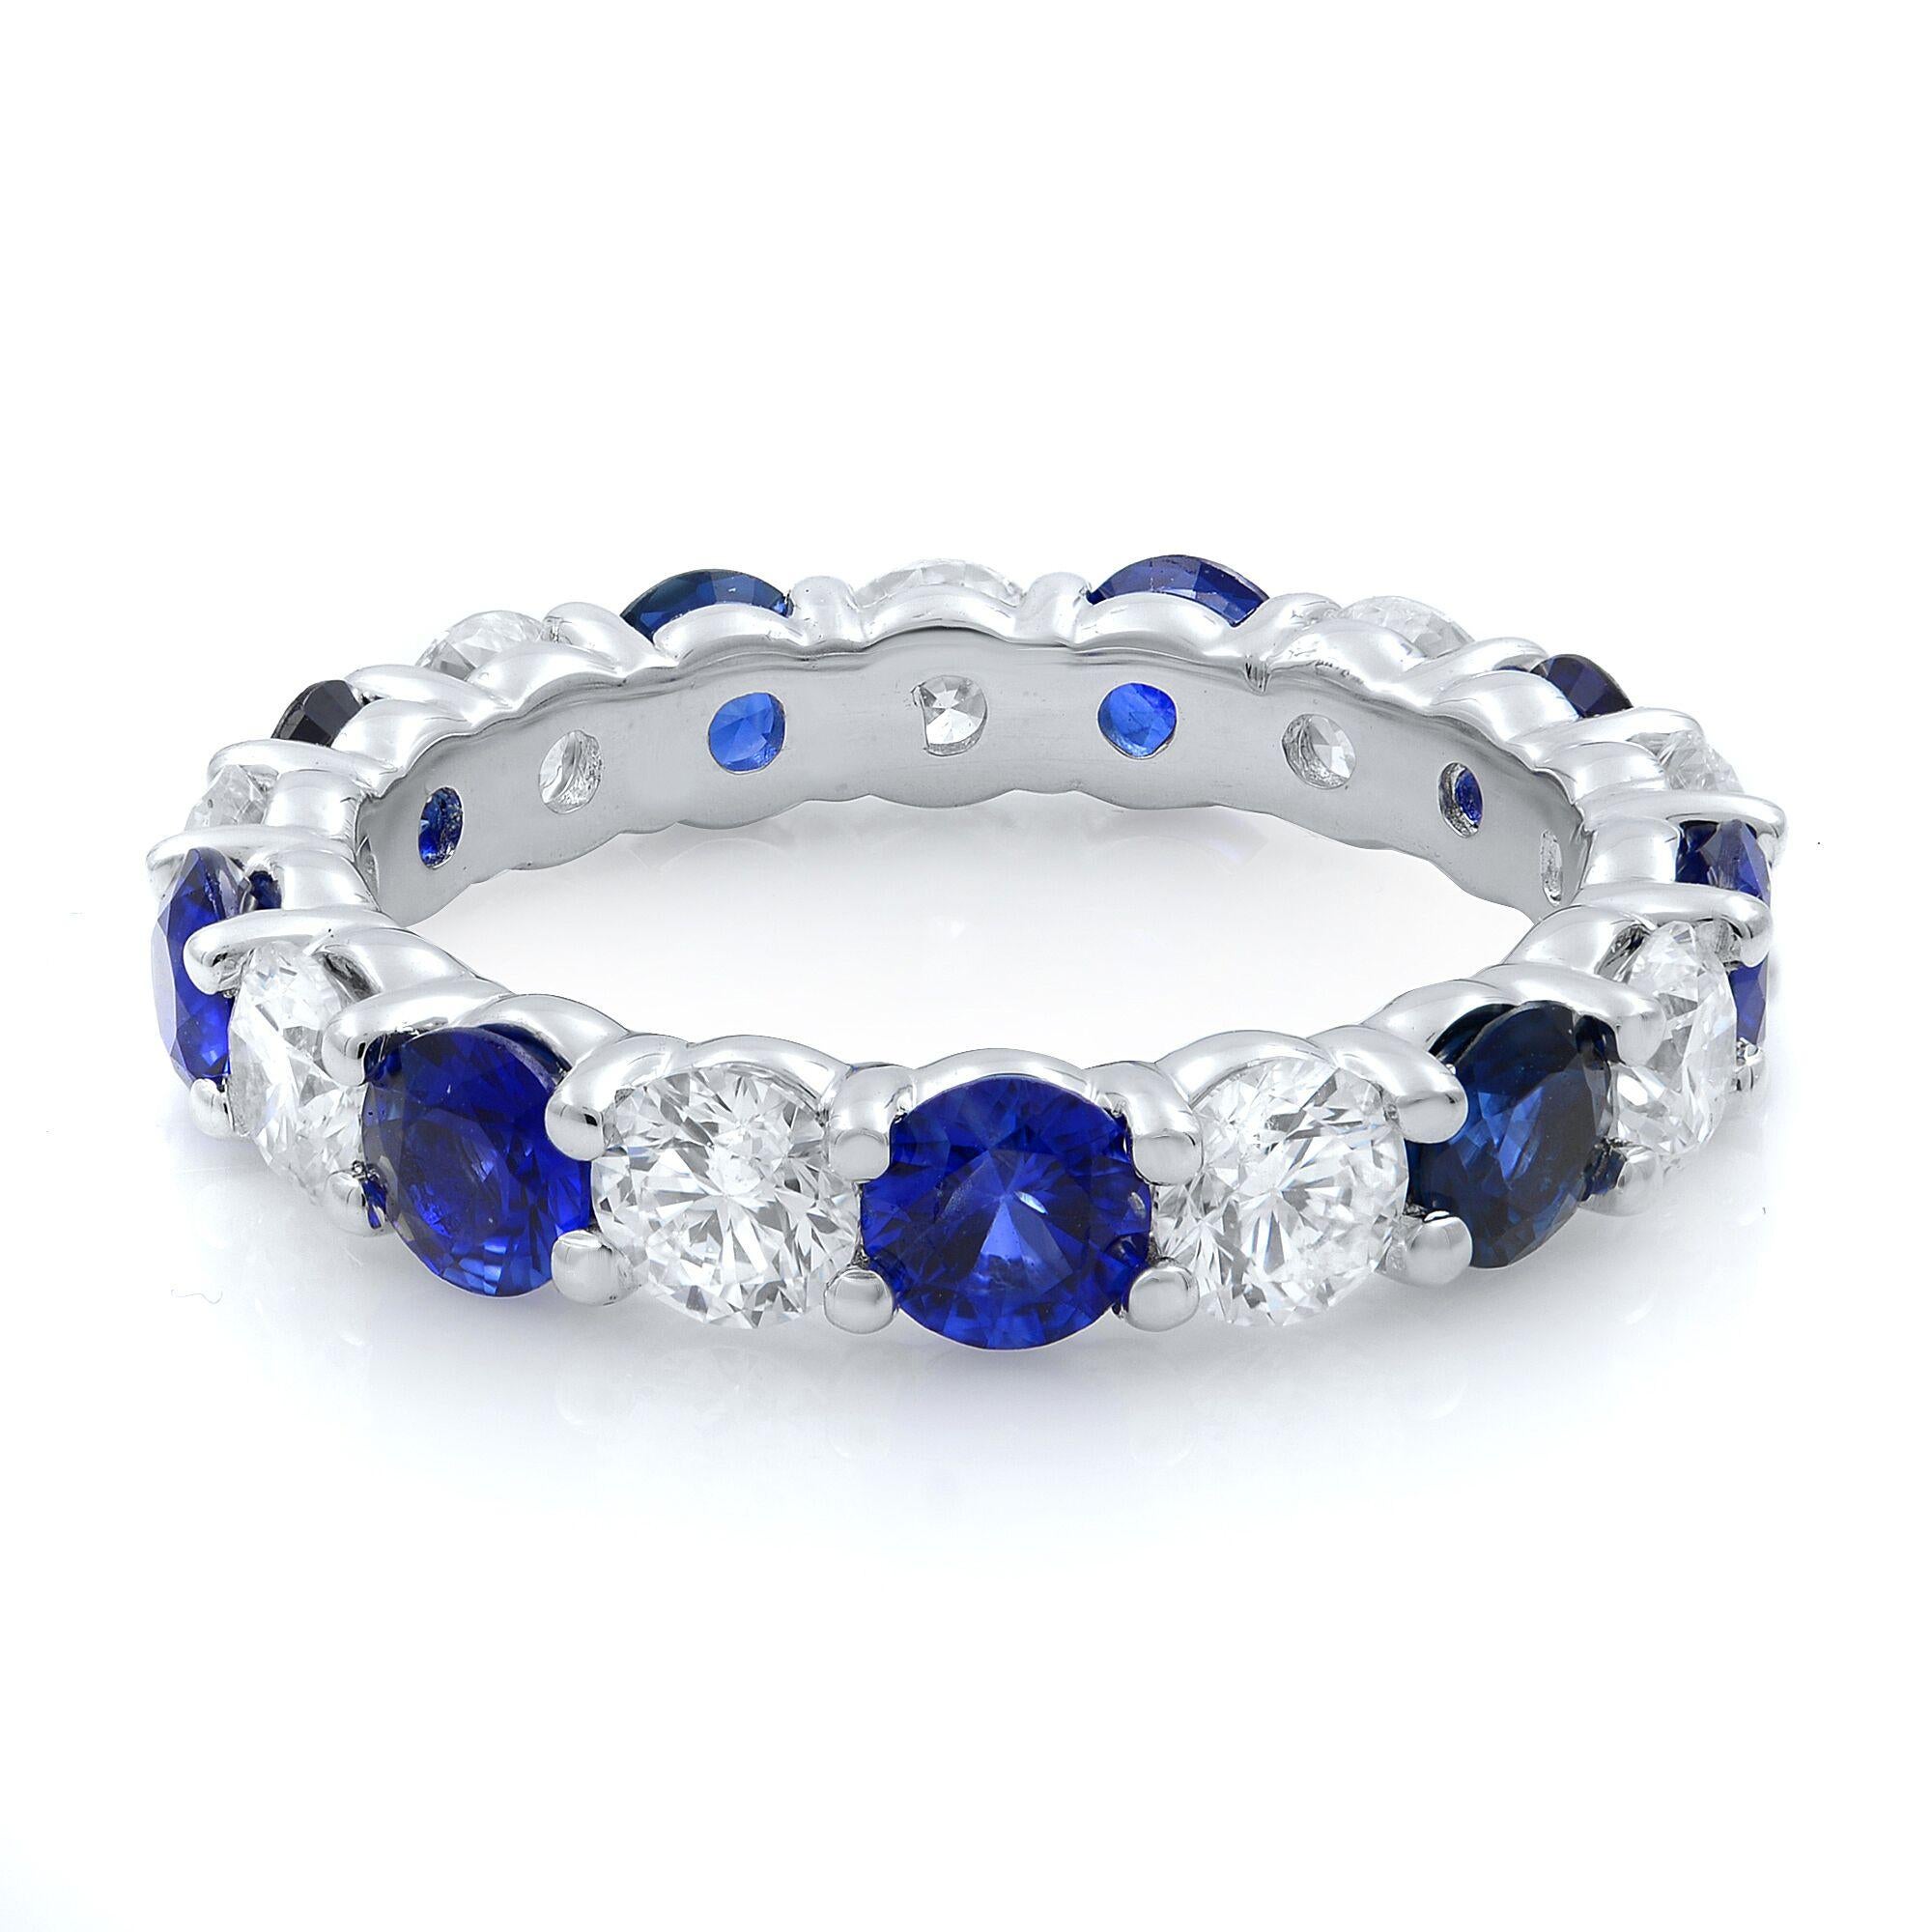 This stunning gemstone eternity band features 9 round cut blue sapphires alternating with 9 brilliant round cut diamonds. The stones are beautifully circling all the way around the band and are set in an elegant 18k white gold shared prong setting.